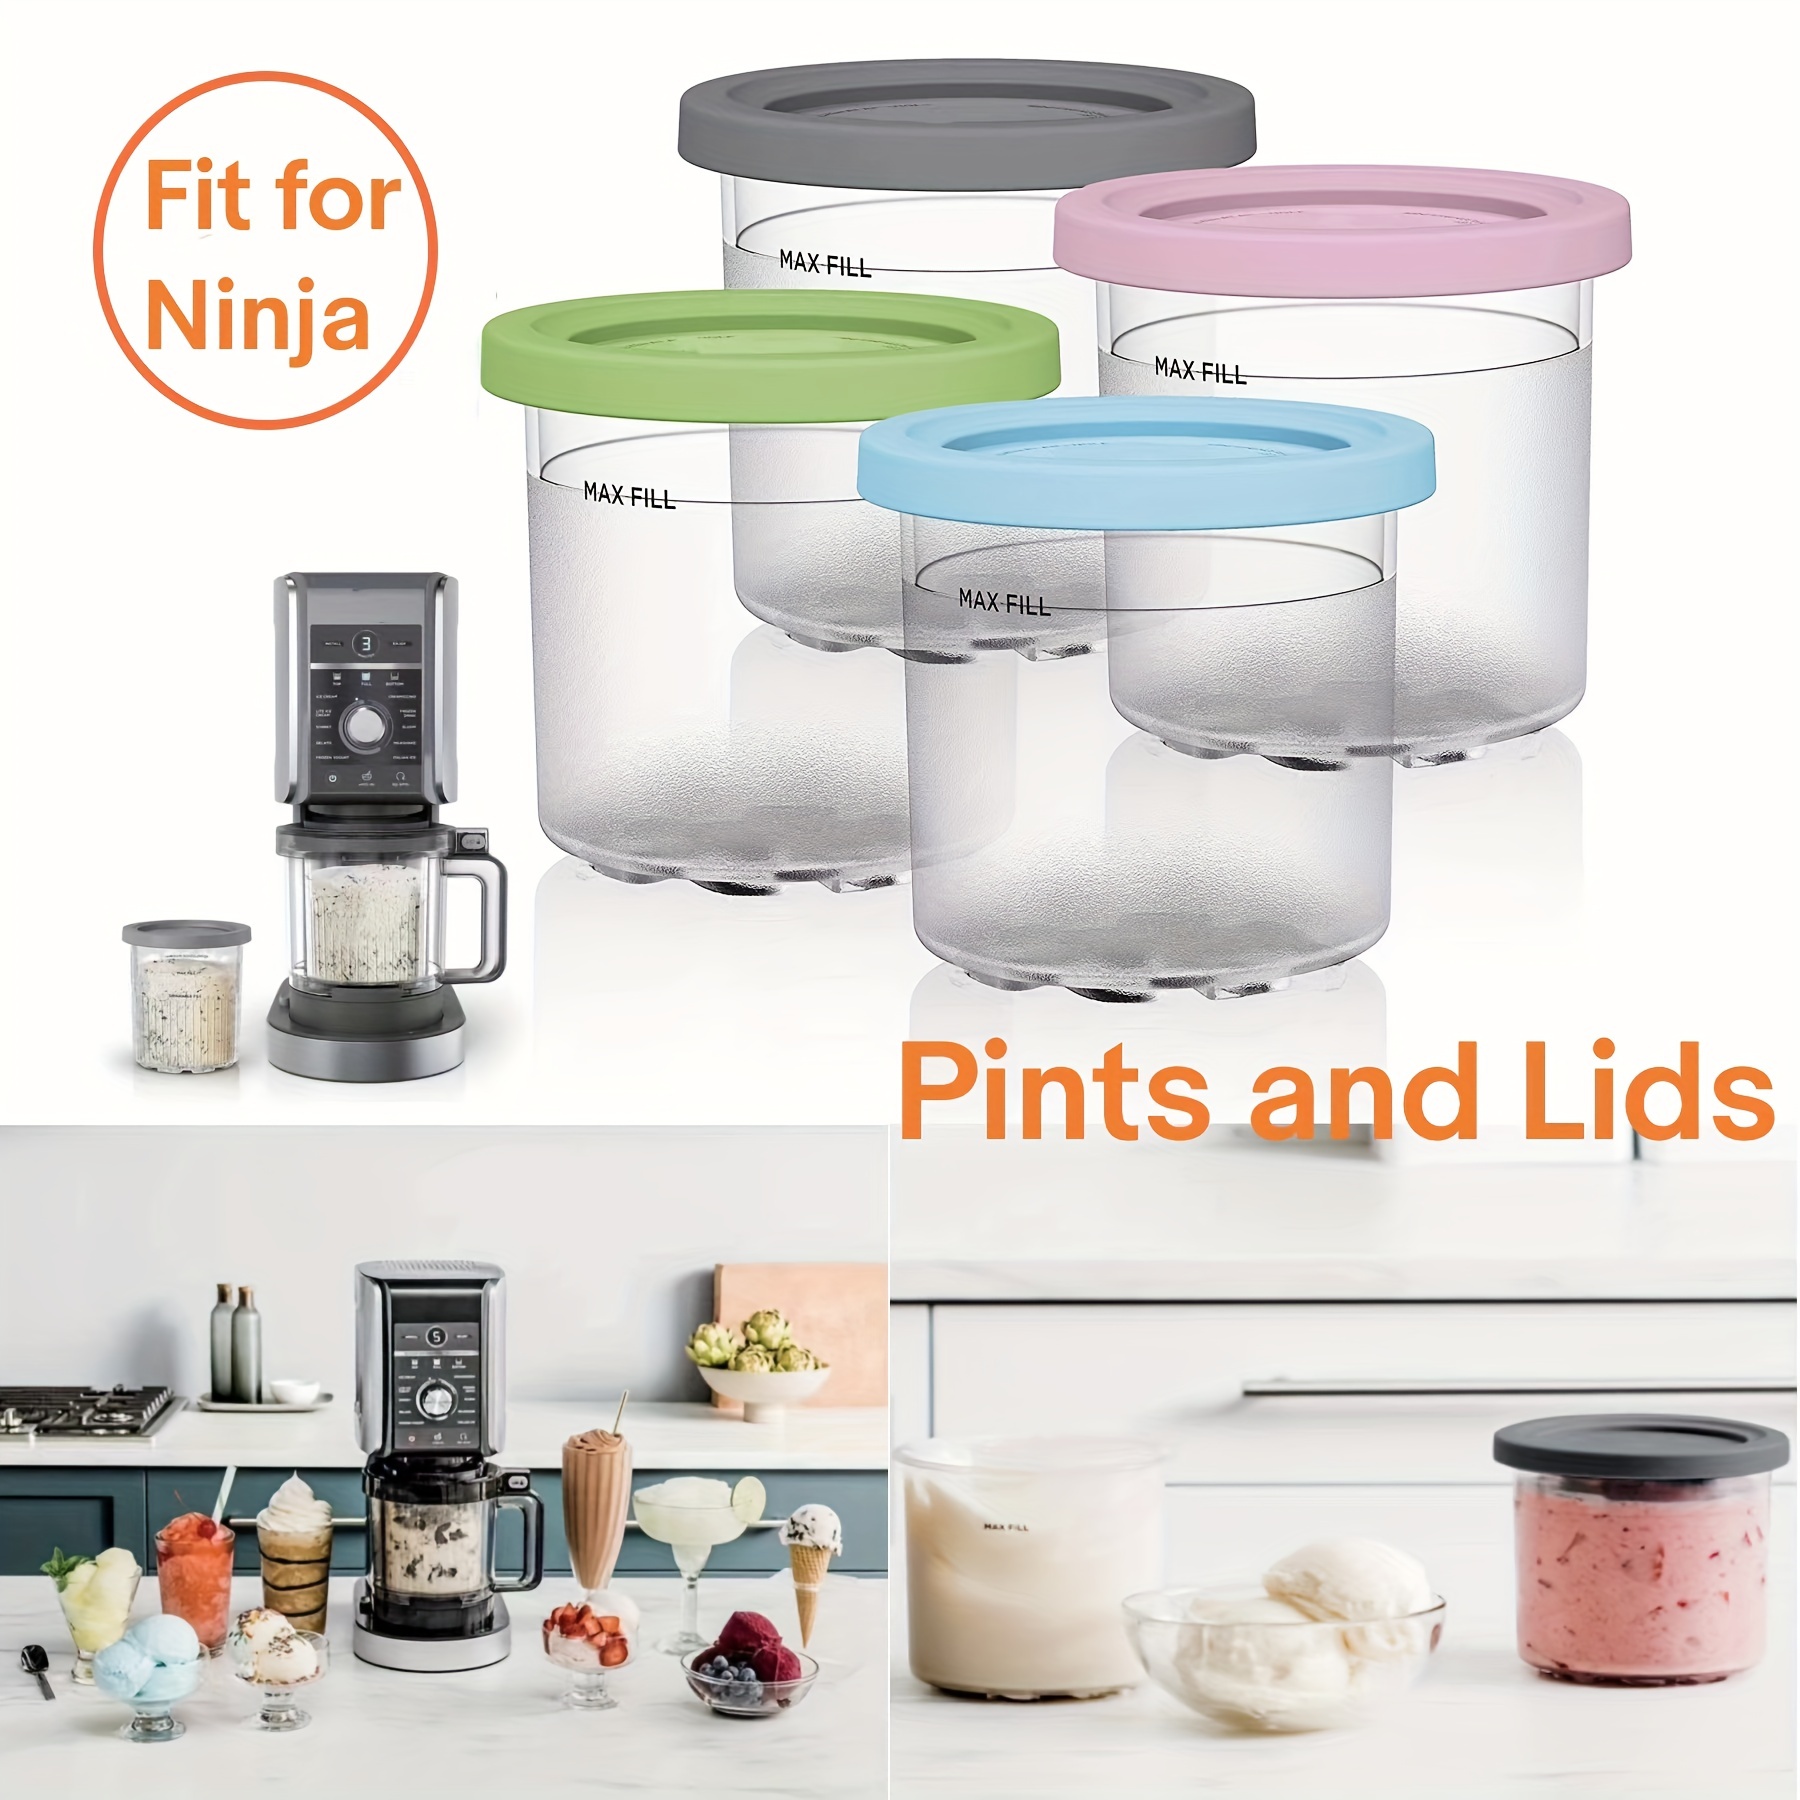 Ice Cream Pint Container with Silicone Lid Replacement for Ninja